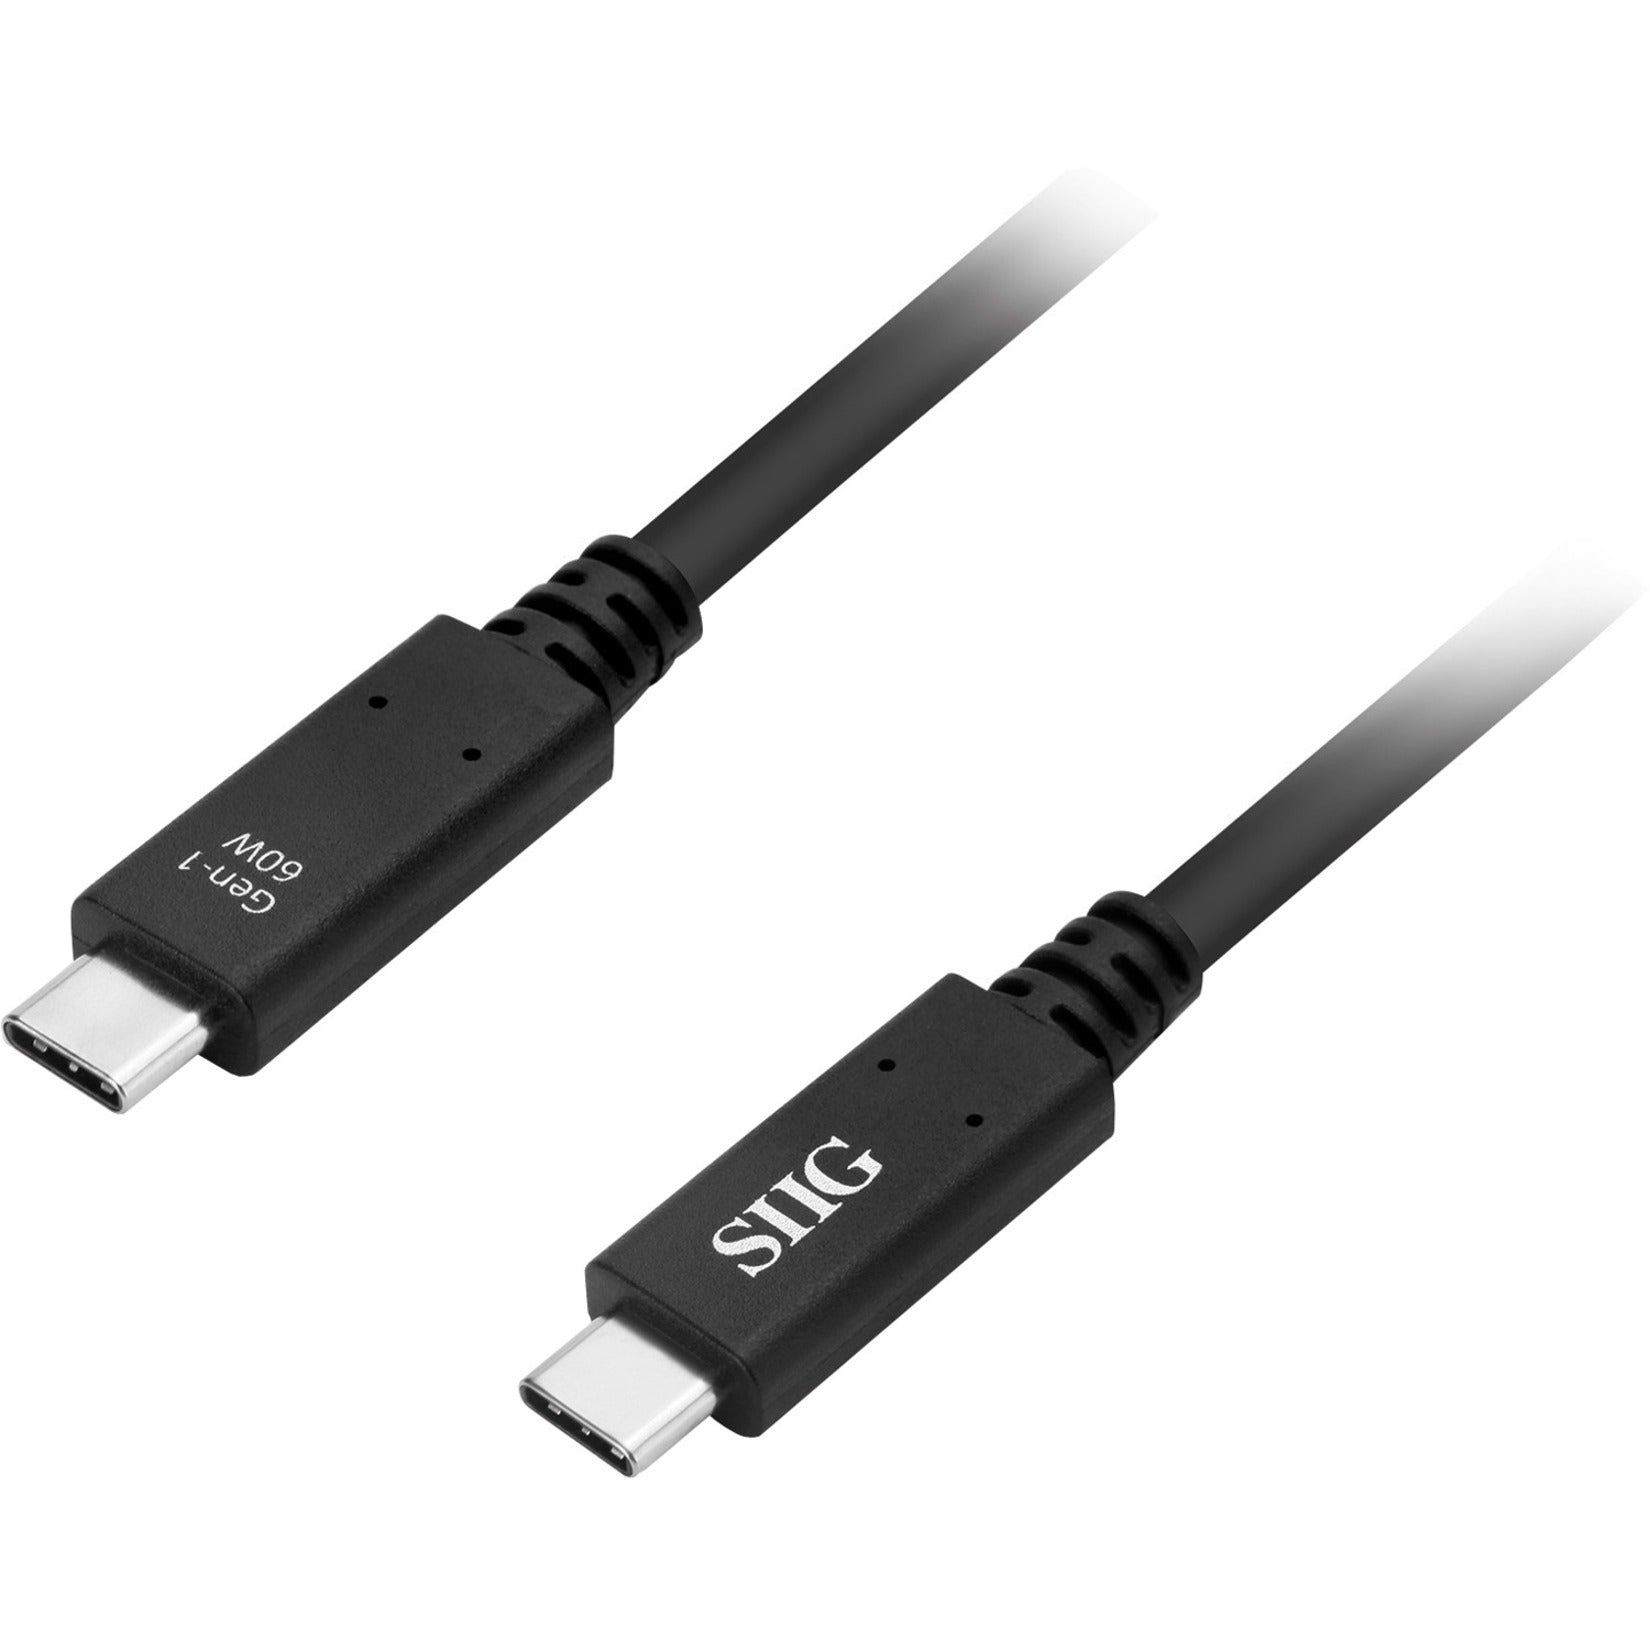 SIIG CB-TC0D11-S1 USB 3.1 Type-C Gen 1 Cable 60W - 1M, Charging, Reversible, 5Gbps